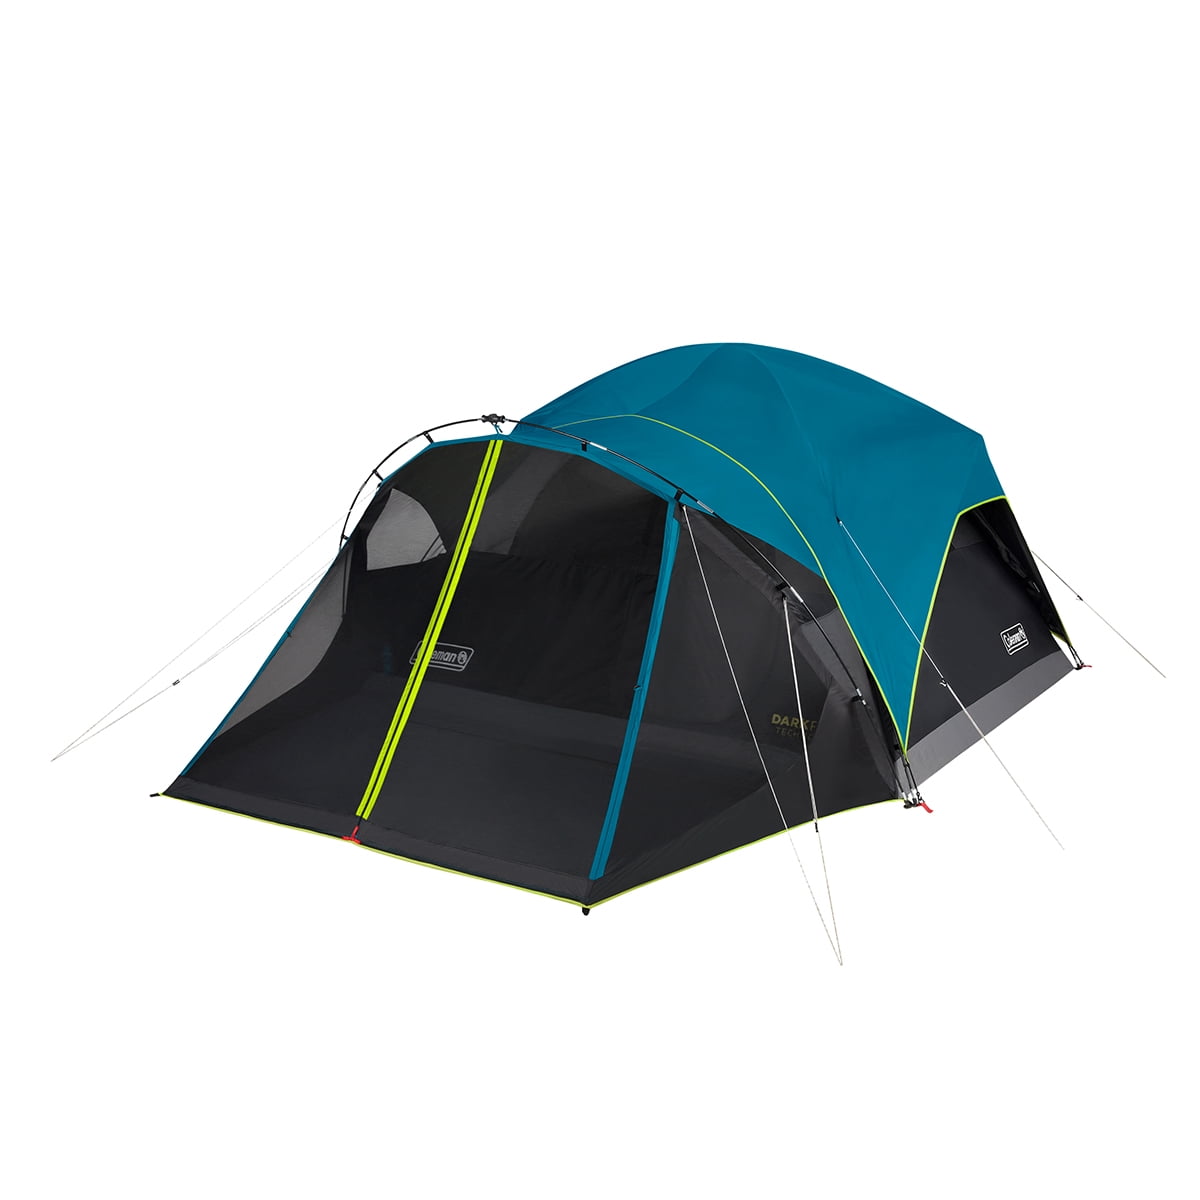 COLEMAN 6-Person Dome Camping Tent with Screened Porch and WeatherTec Systems 